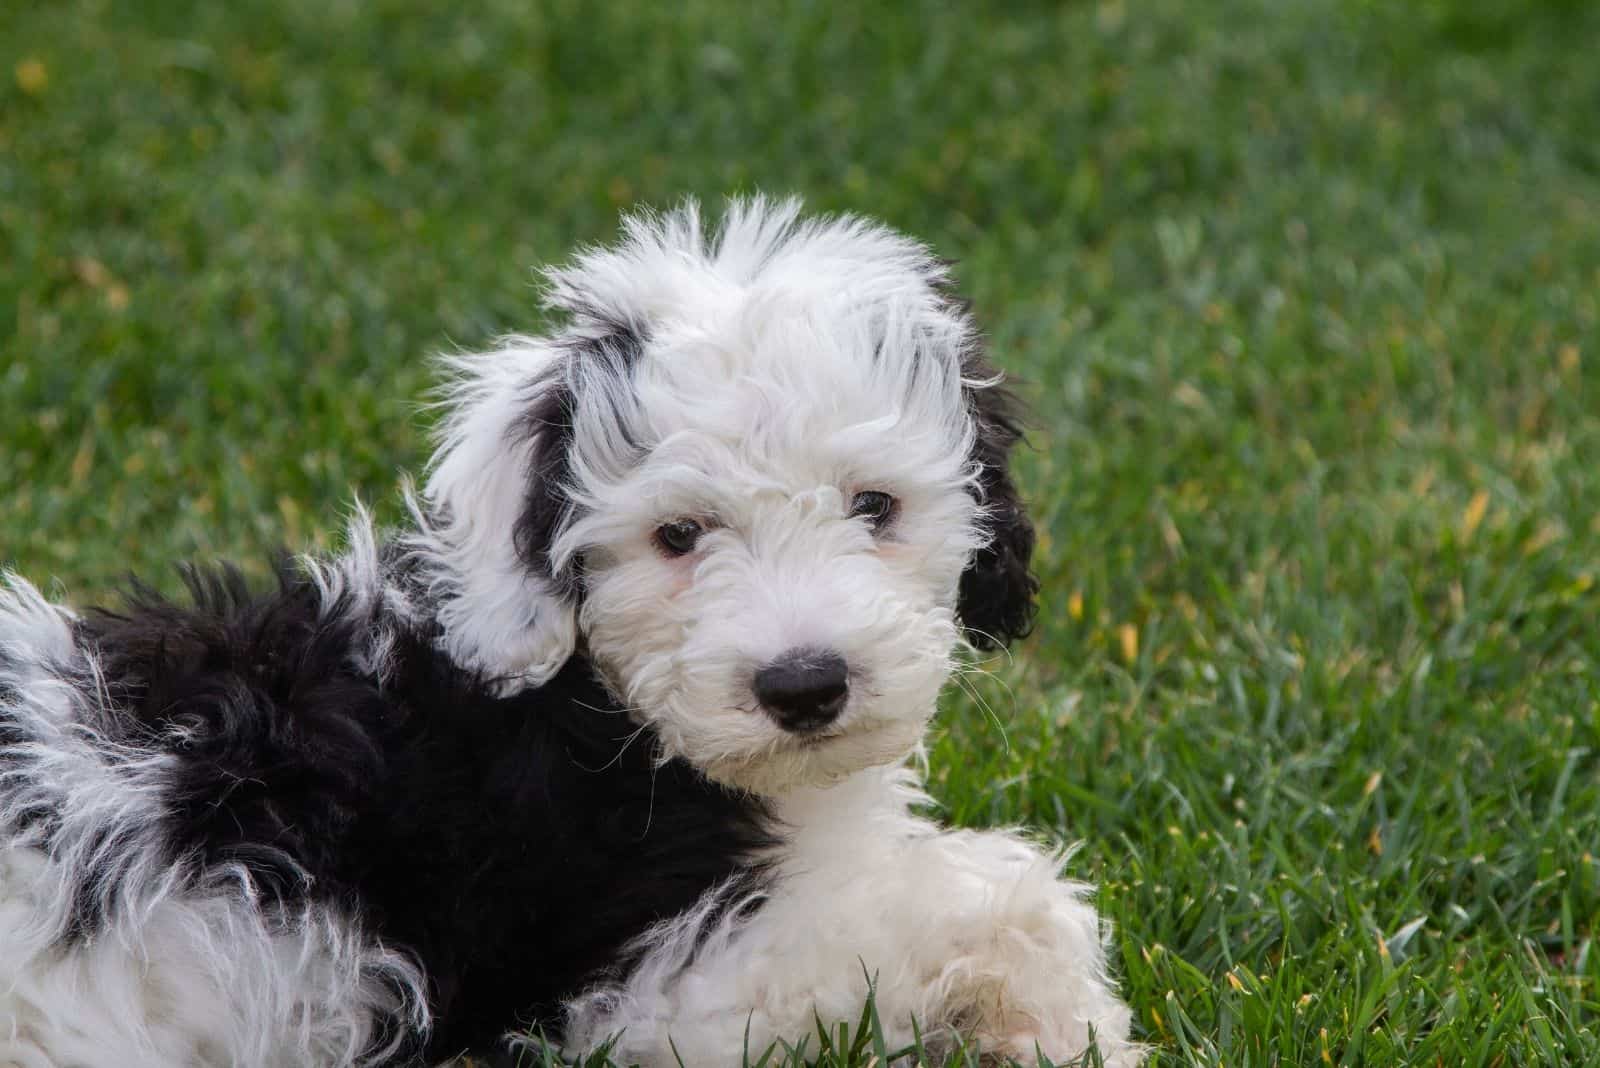 a sheepadoodle puppy lying down in the grass lawn